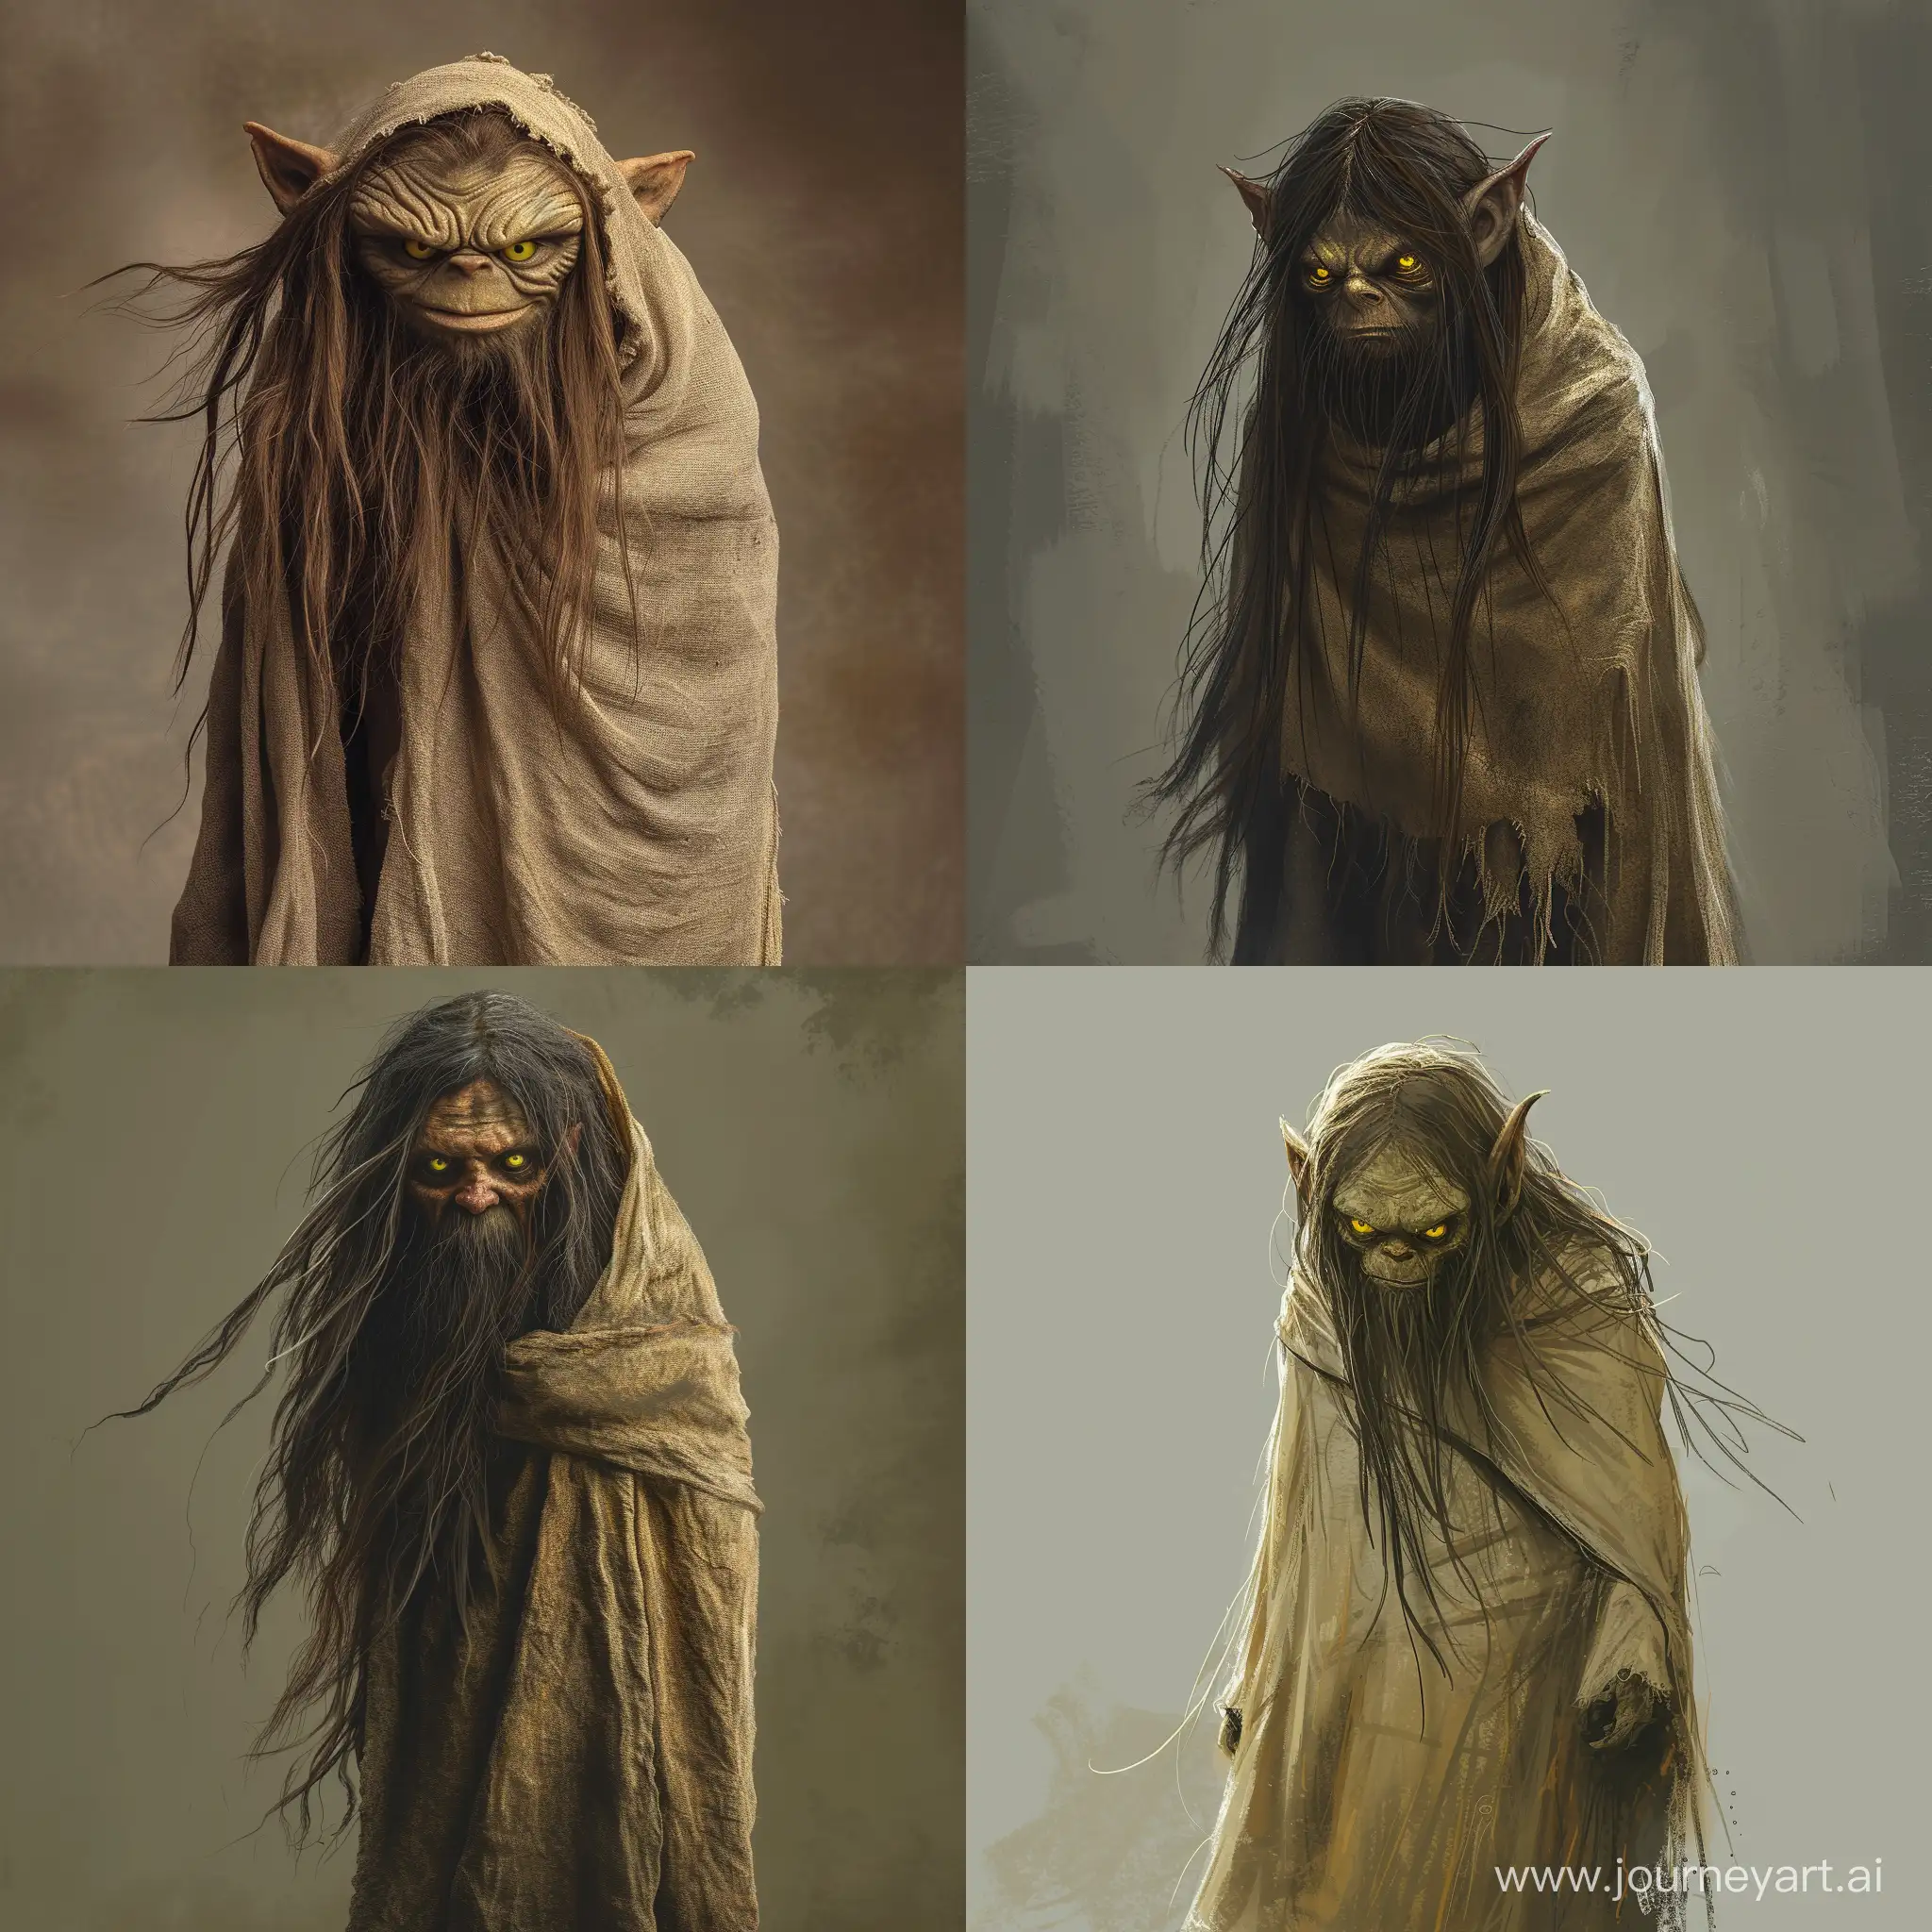 a young goblin with long hair behind his back, no beard or mustache, full height, face hidden, whole body wrapped in a baggy cloth like a poncho, with yellow evil eyes